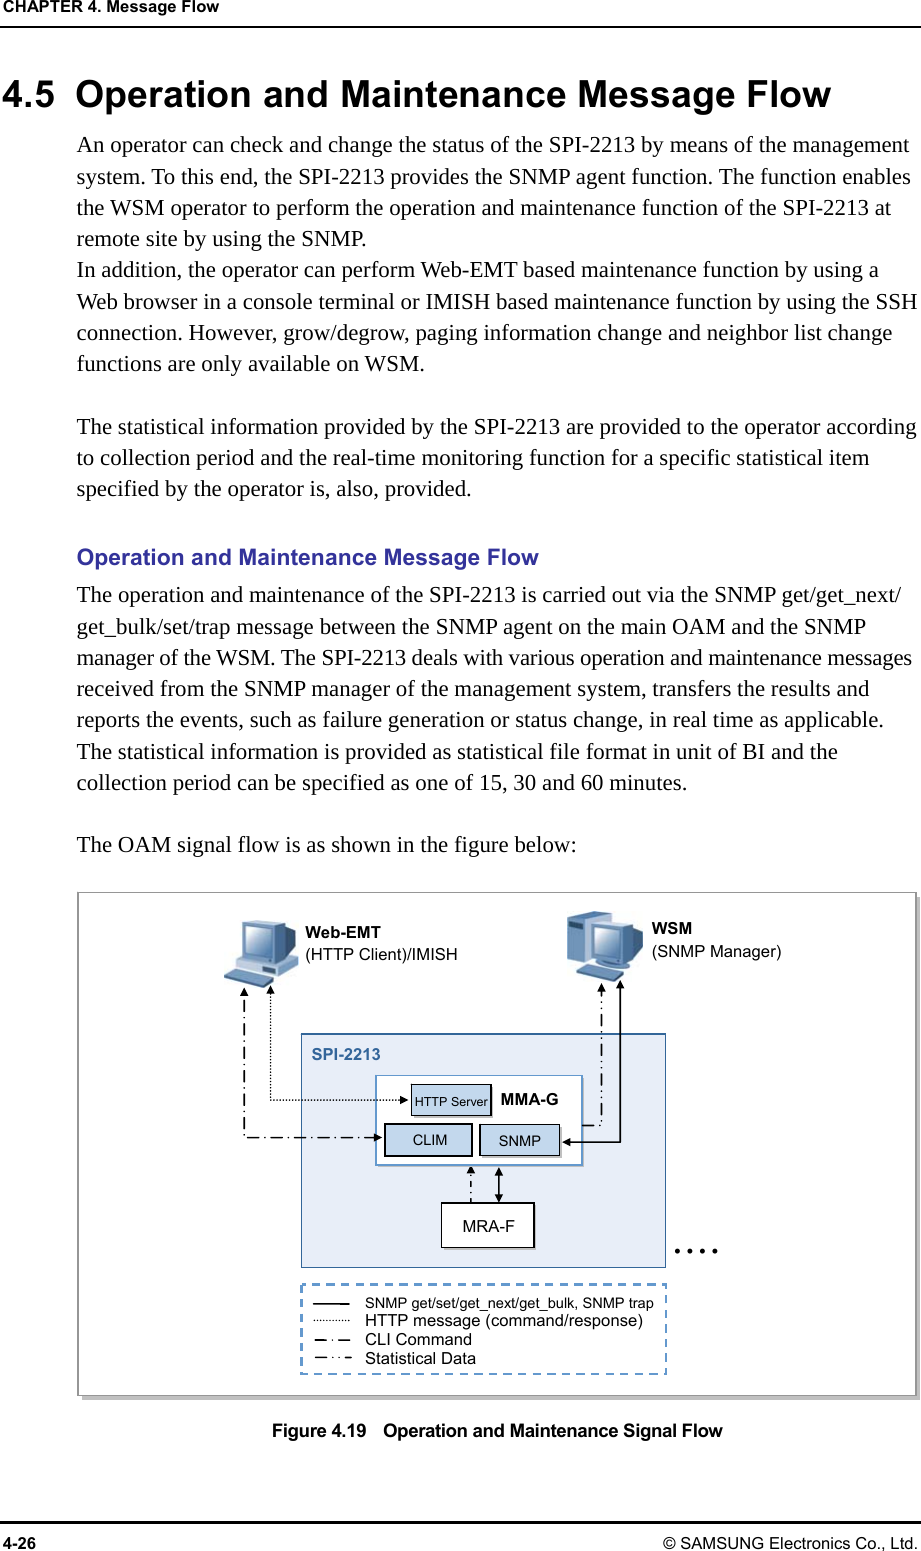 CHAPTER 4. Message Flow 4-26 © SAMSUNG Electronics Co., Ltd. • • • •WSM (SNMP Manager) Web-EMT (HTTP Client)/IMISH MRA-F MMA-GHTTP ServerSNMP CLIM SNMP get/set/get_next/get_bulk, SNMP trap HTTP message (command/response) CLI Command Statistical Data SPI-2213 4.5  Operation and Maintenance Message Flow An operator can check and change the status of the SPI-2213 by means of the management system. To this end, the SPI-2213 provides the SNMP agent function. The function enables the WSM operator to perform the operation and maintenance function of the SPI-2213 at remote site by using the SNMP. In addition, the operator can perform Web-EMT based maintenance function by using a Web browser in a console terminal or IMISH based maintenance function by using the SSH connection. However, grow/degrow, paging information change and neighbor list change functions are only available on WSM.  The statistical information provided by the SPI-2213 are provided to the operator according to collection period and the real-time monitoring function for a specific statistical item specified by the operator is, also, provided.  Operation and Maintenance Message Flow The operation and maintenance of the SPI-2213 is carried out via the SNMP get/get_next/ get_bulk/set/trap message between the SNMP agent on the main OAM and the SNMP manager of the WSM. The SPI-2213 deals with various operation and maintenance messages received from the SNMP manager of the management system, transfers the results and reports the events, such as failure generation or status change, in real time as applicable. The statistical information is provided as statistical file format in unit of BI and the collection period can be specified as one of 15, 30 and 60 minutes.  The OAM signal flow is as shown in the figure below:  Figure 4.19    Operation and Maintenance Signal Flow 